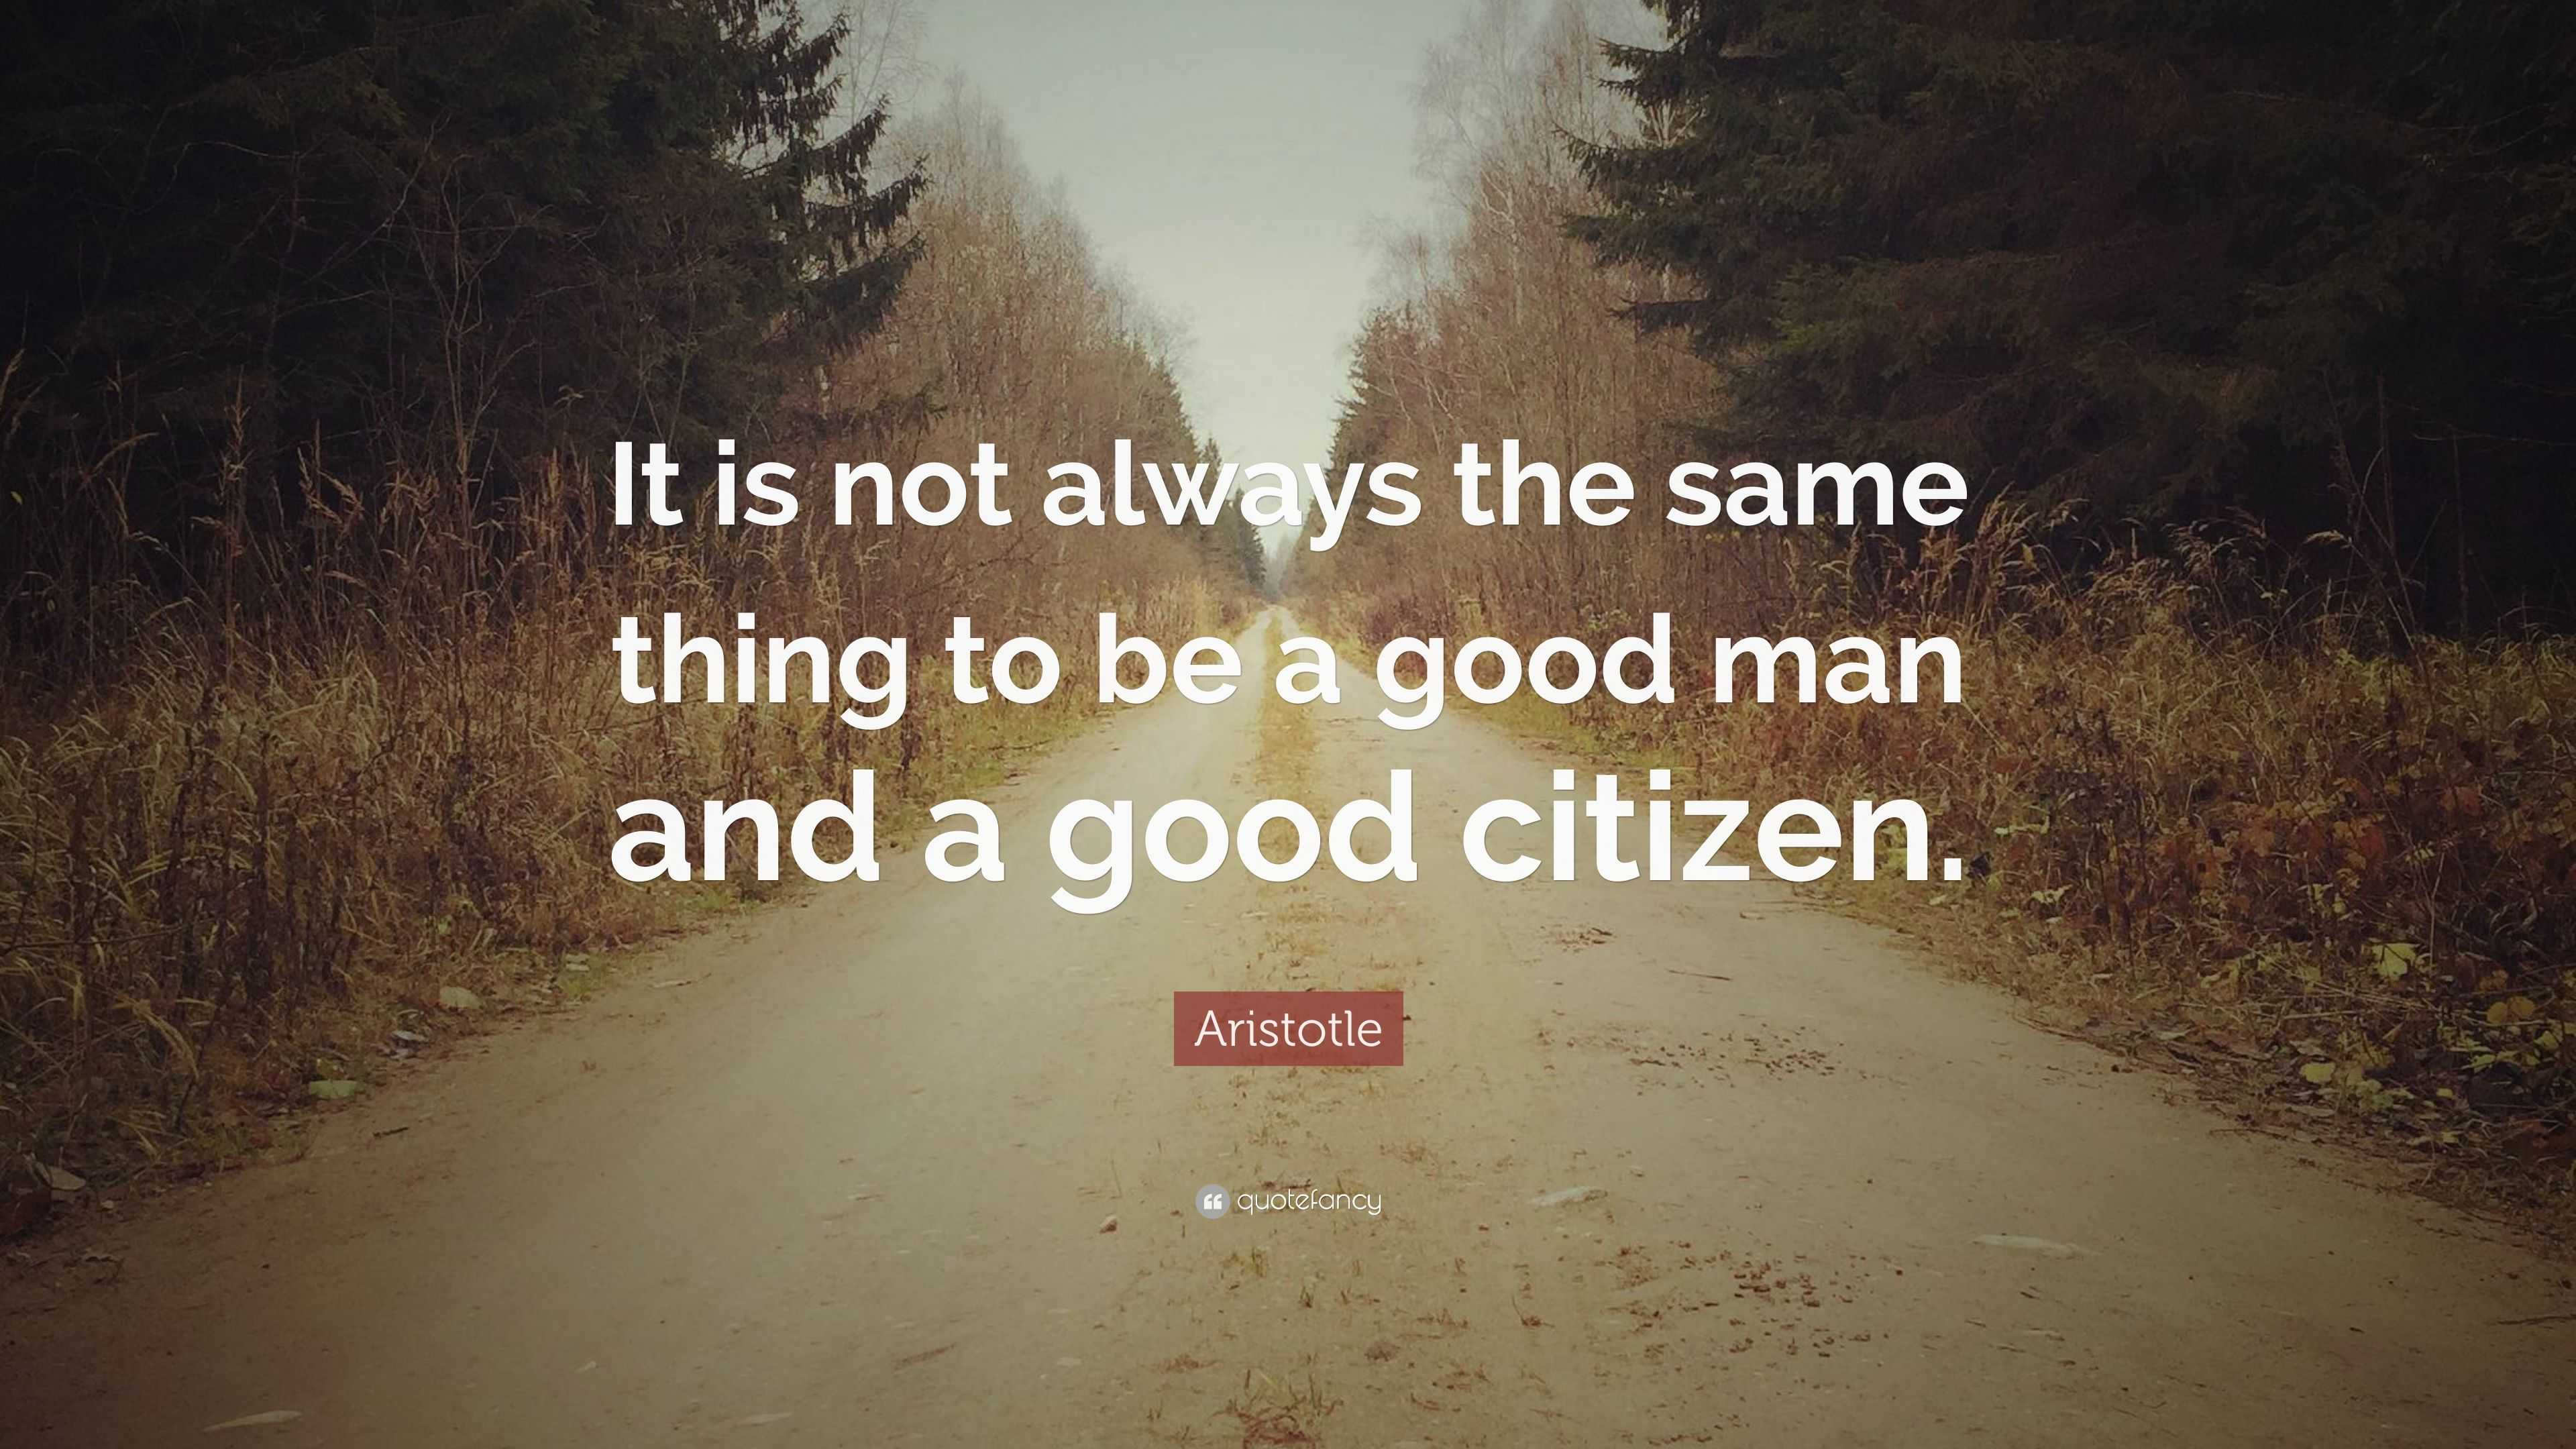 Aristotle Quote: “It is not always the same thing to be a good man and